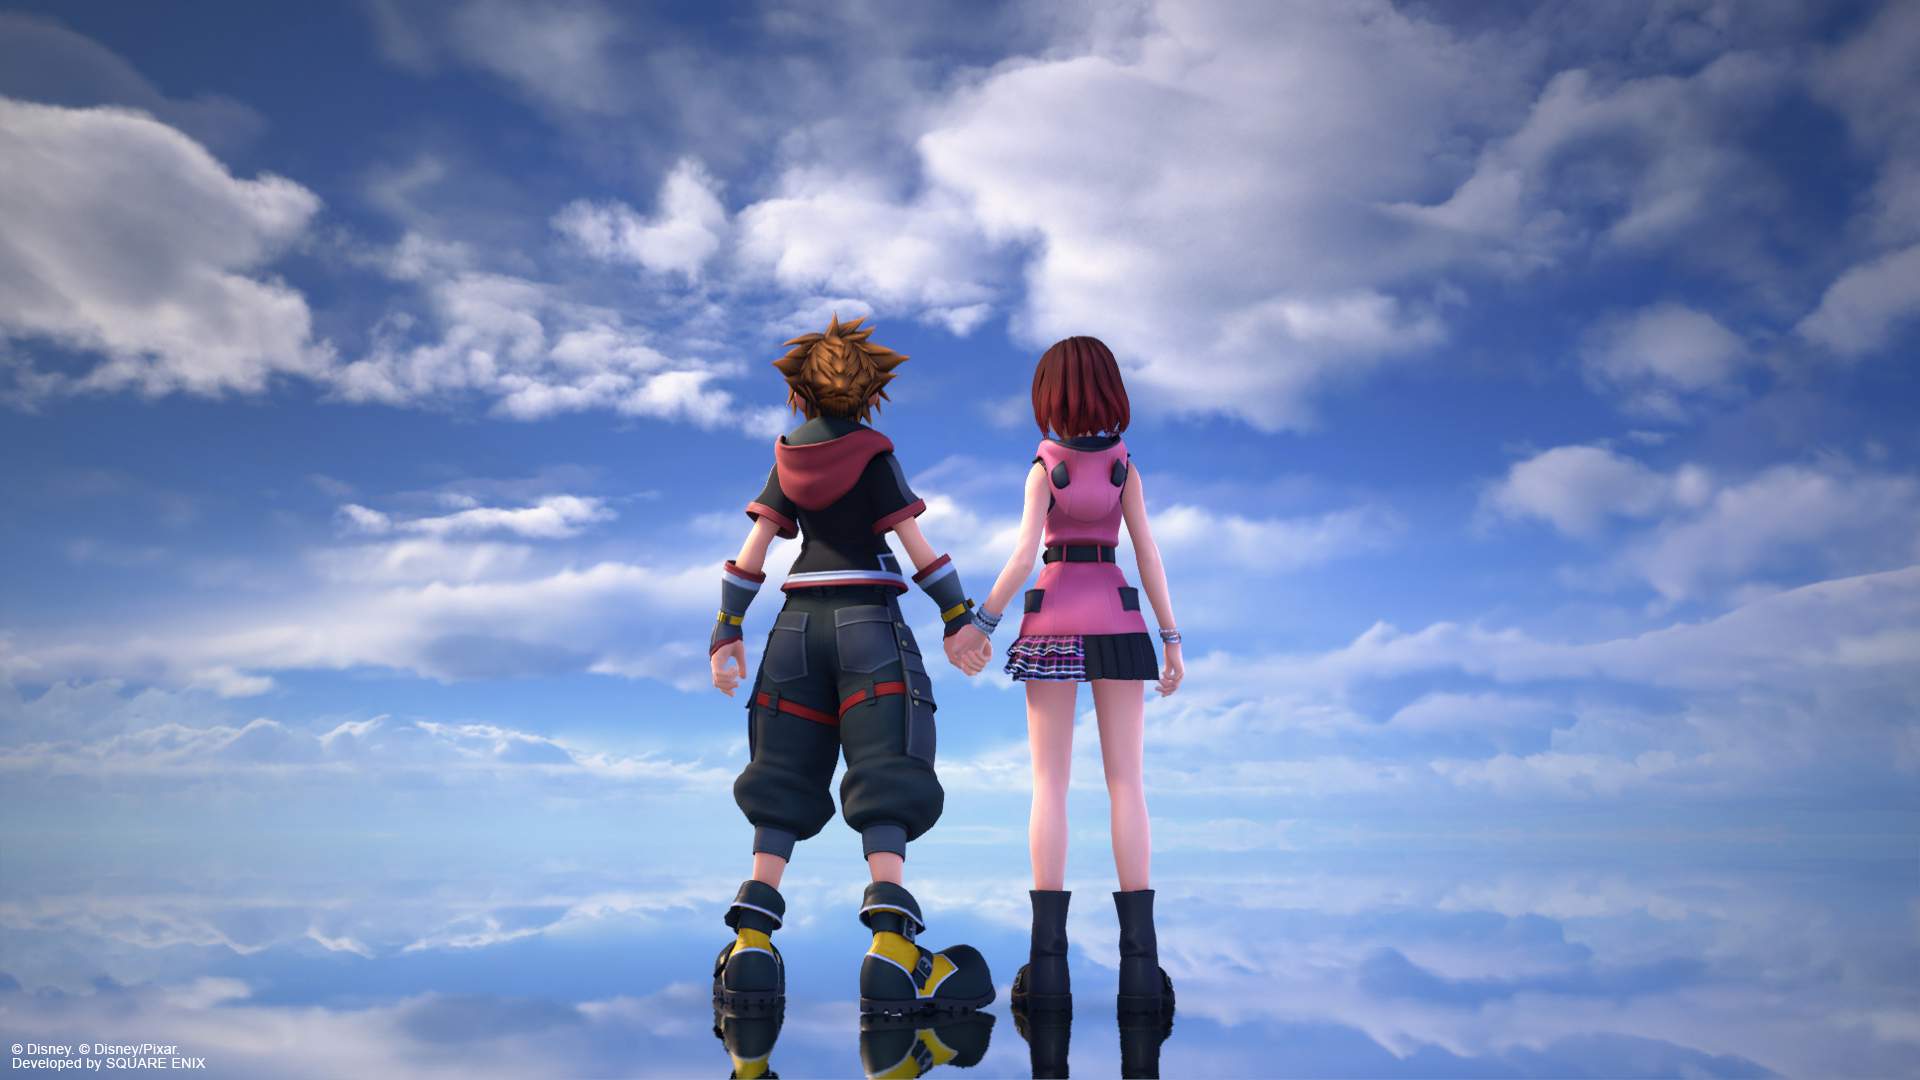 KINGDOM HEARTS III Re Mind DLC out now on PS4 | Square Enix Blog